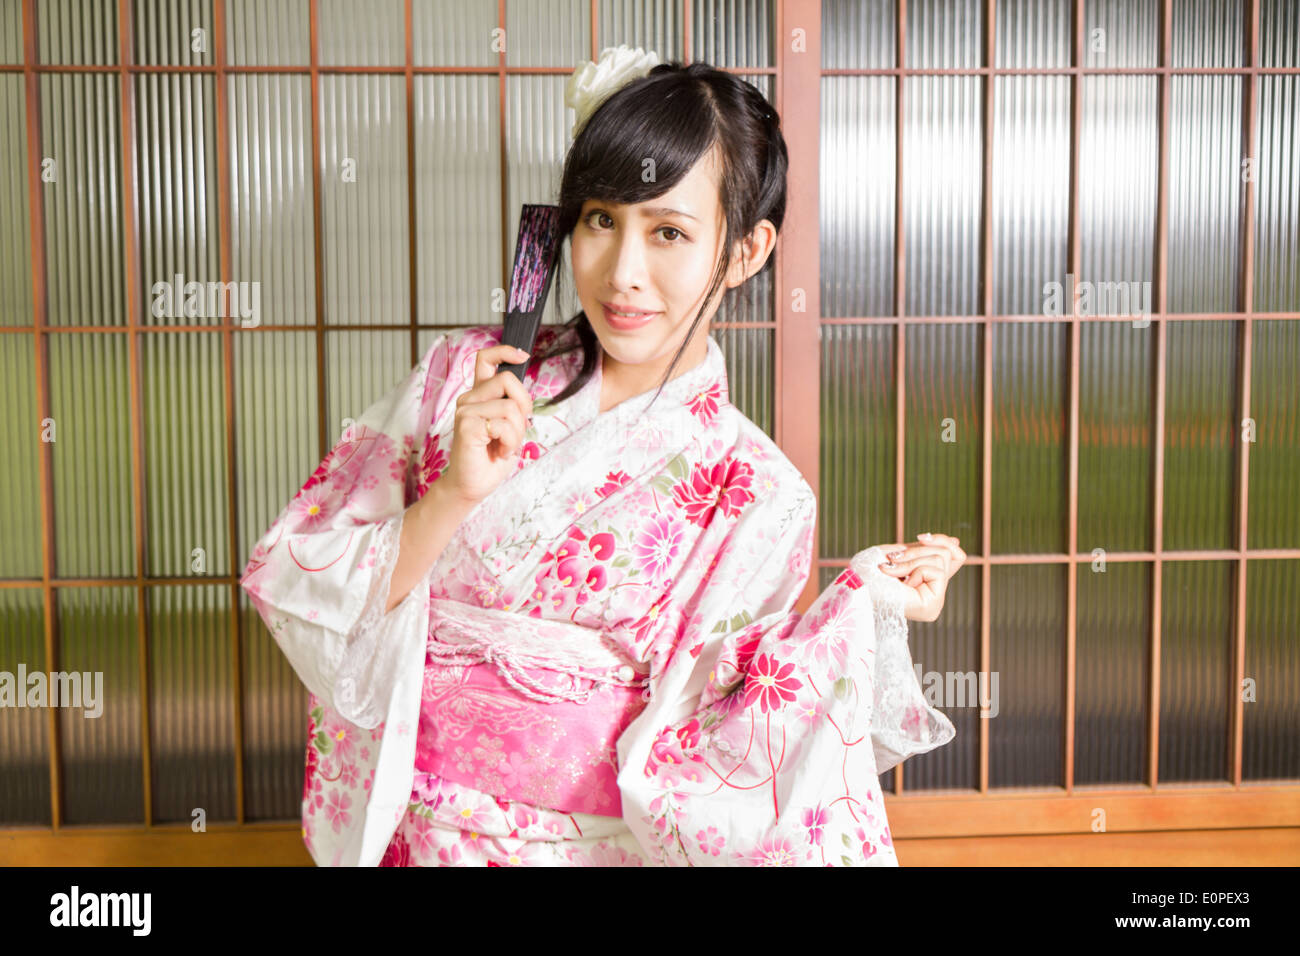 Asian woman in kimono standing by wooden framed windows Stock Photo - Alamy